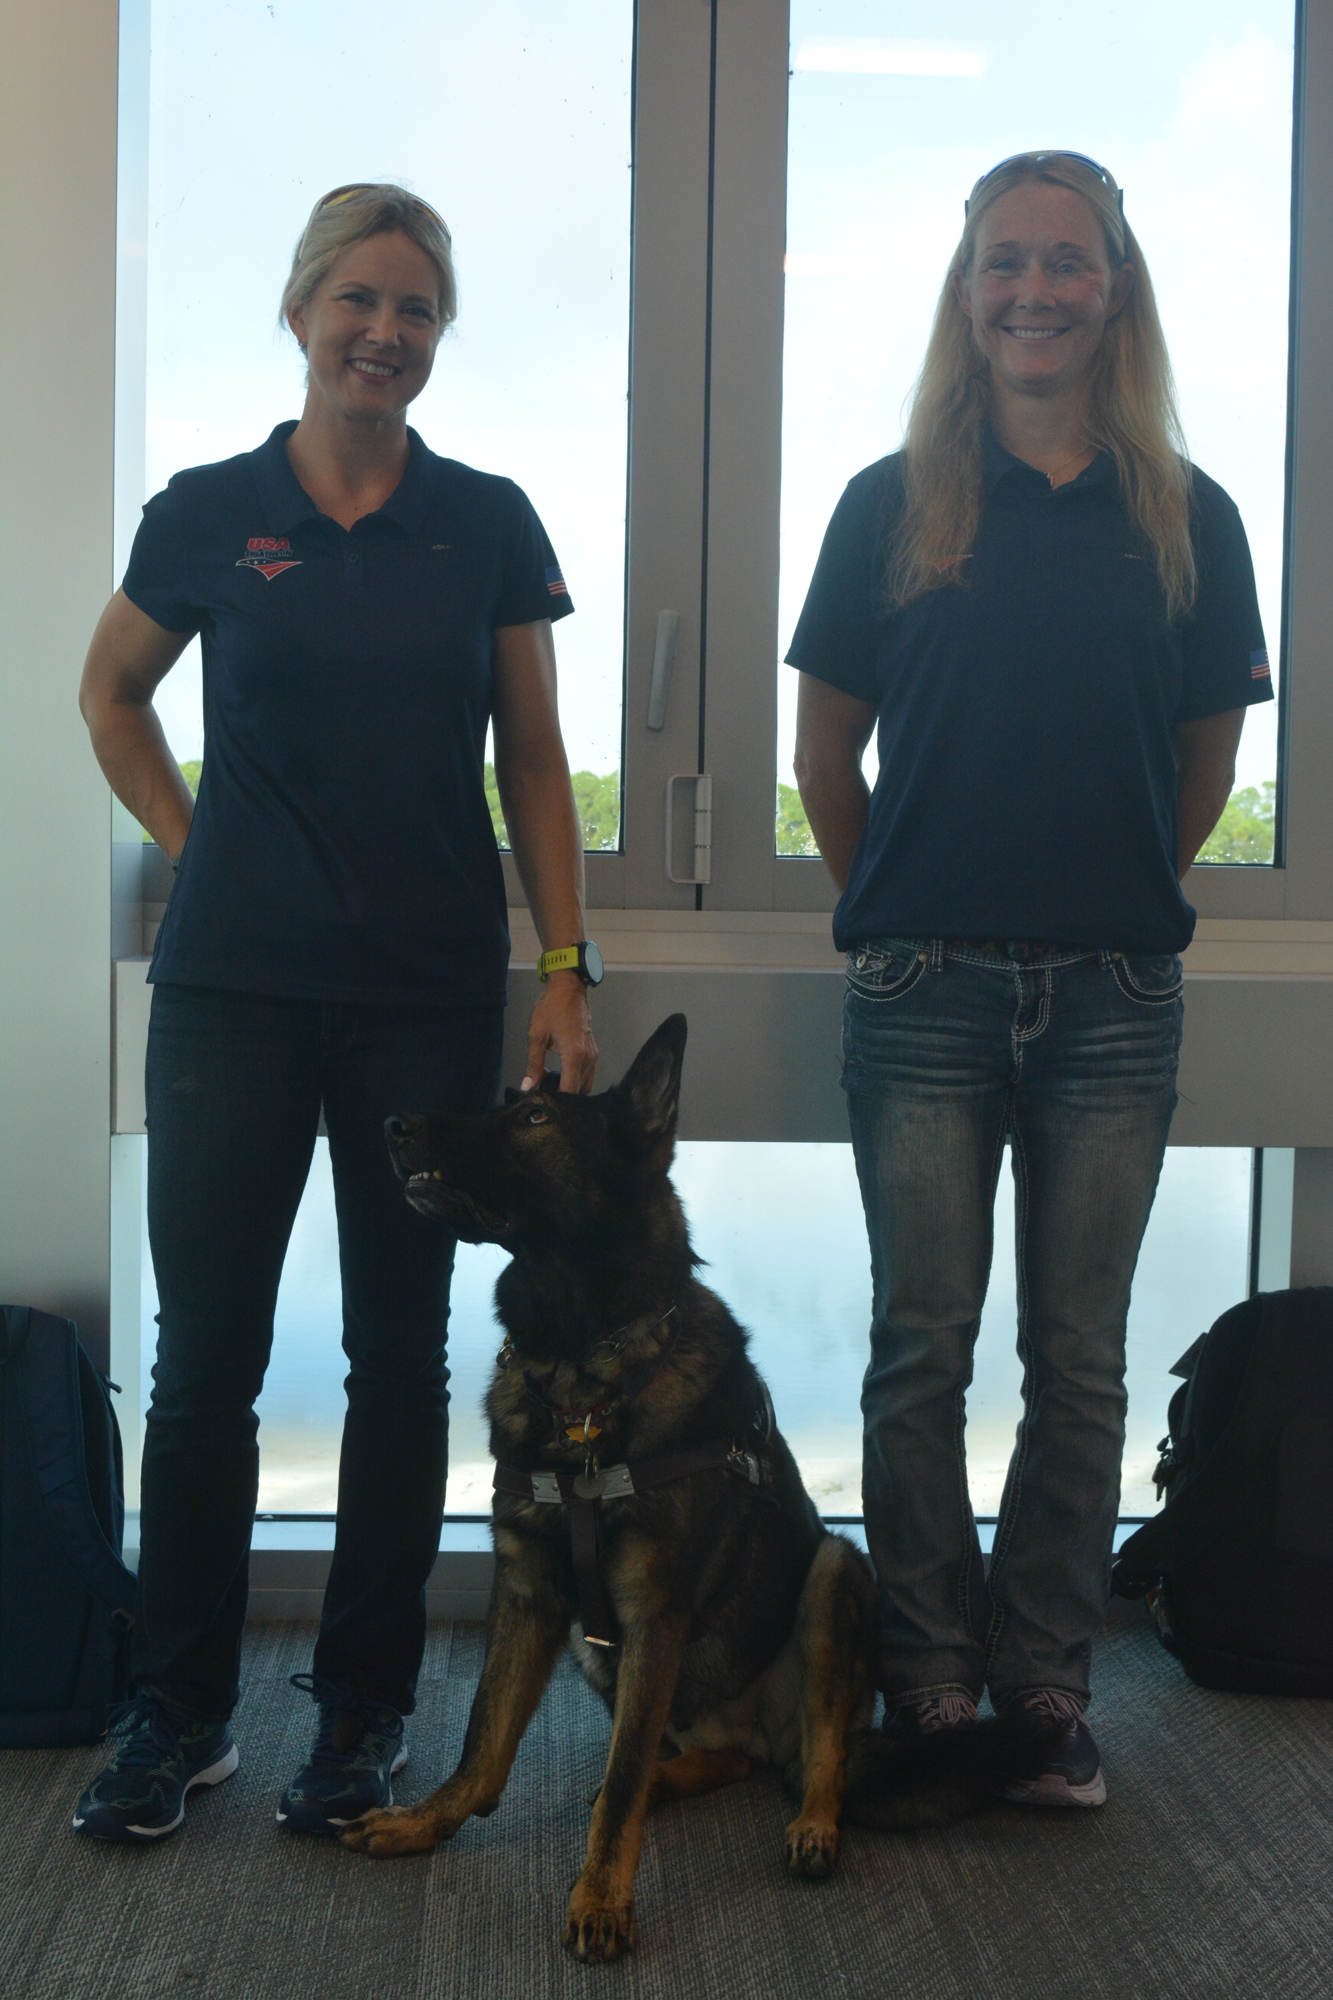 Amy Dixon and Kirsten Sass, seen with guide dog Woody, won the 2017 Sarasota-Bradenton Triathlon Festival's Paratriathlon Visually Impaired division, and were back for more in 2018.